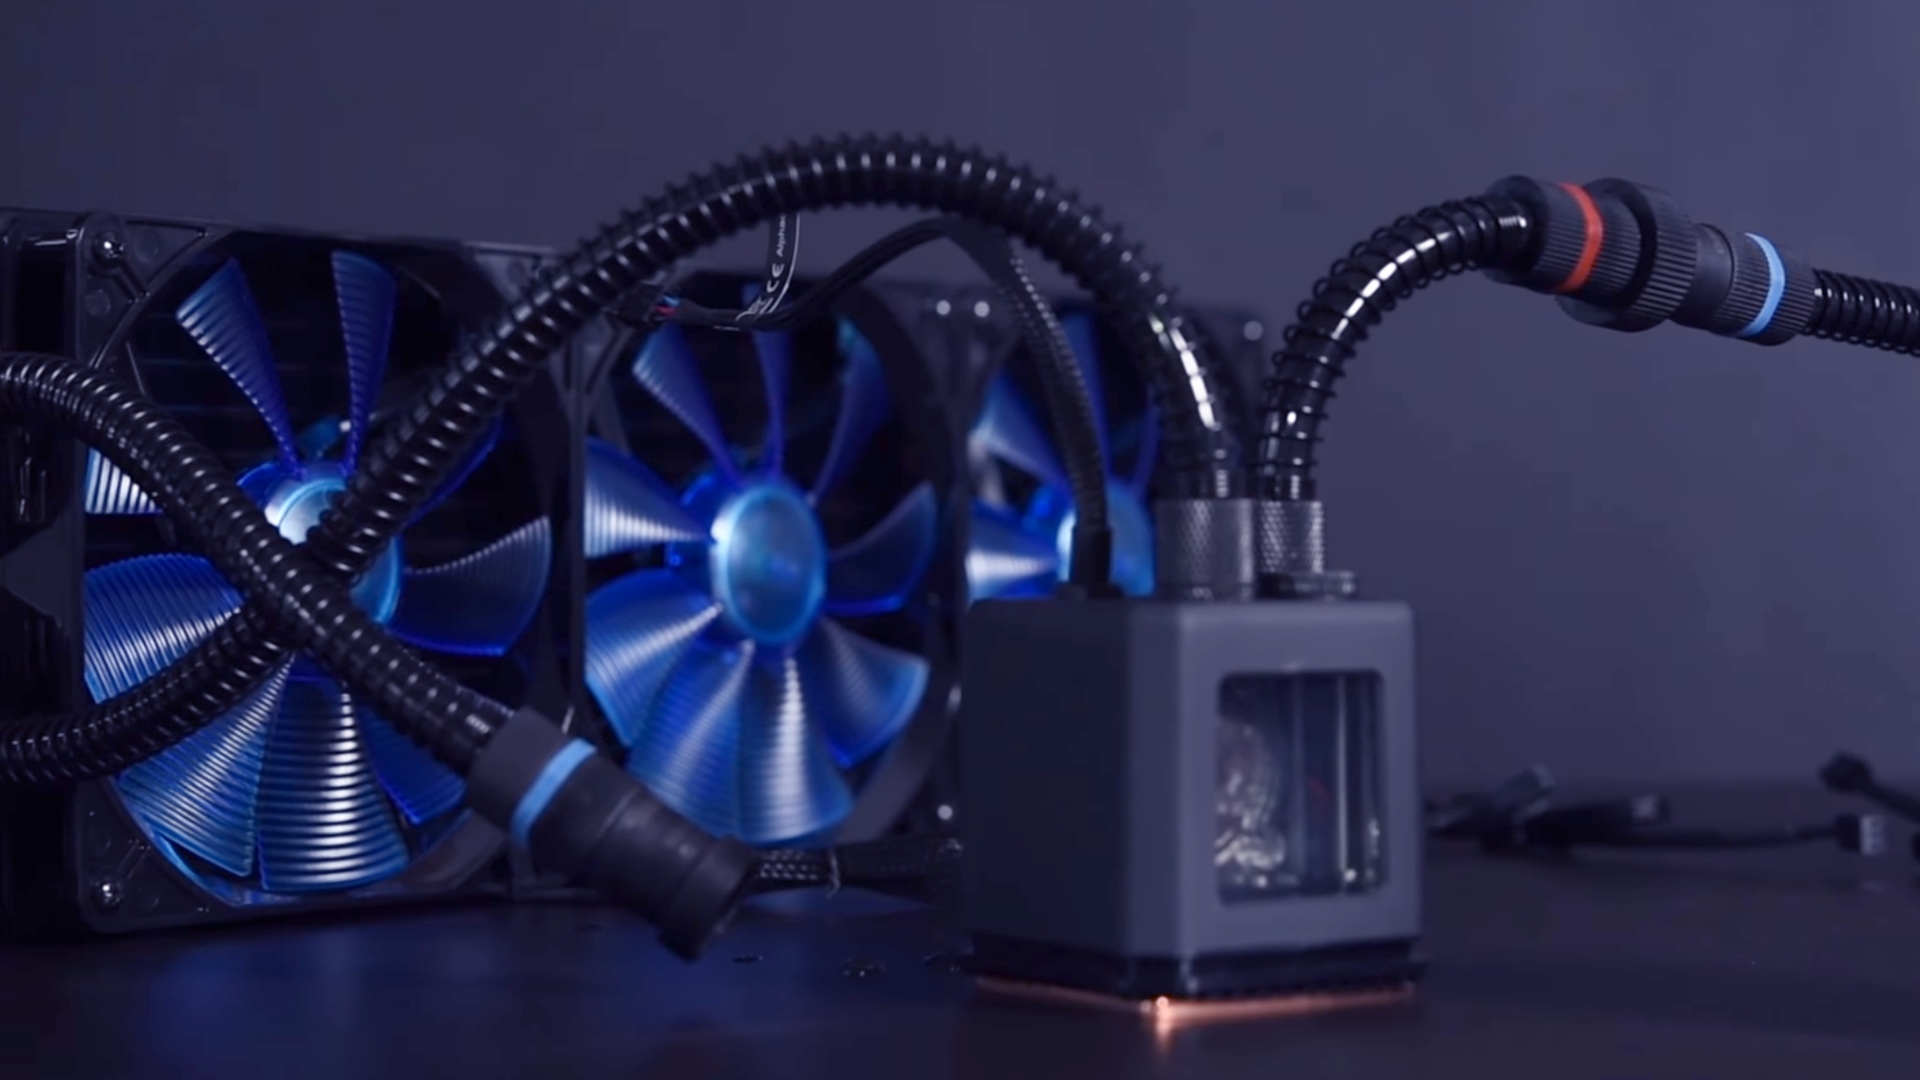 The Best Aio Cooler The Top Liquid Coolers For Your Cpu In Pcgamesn